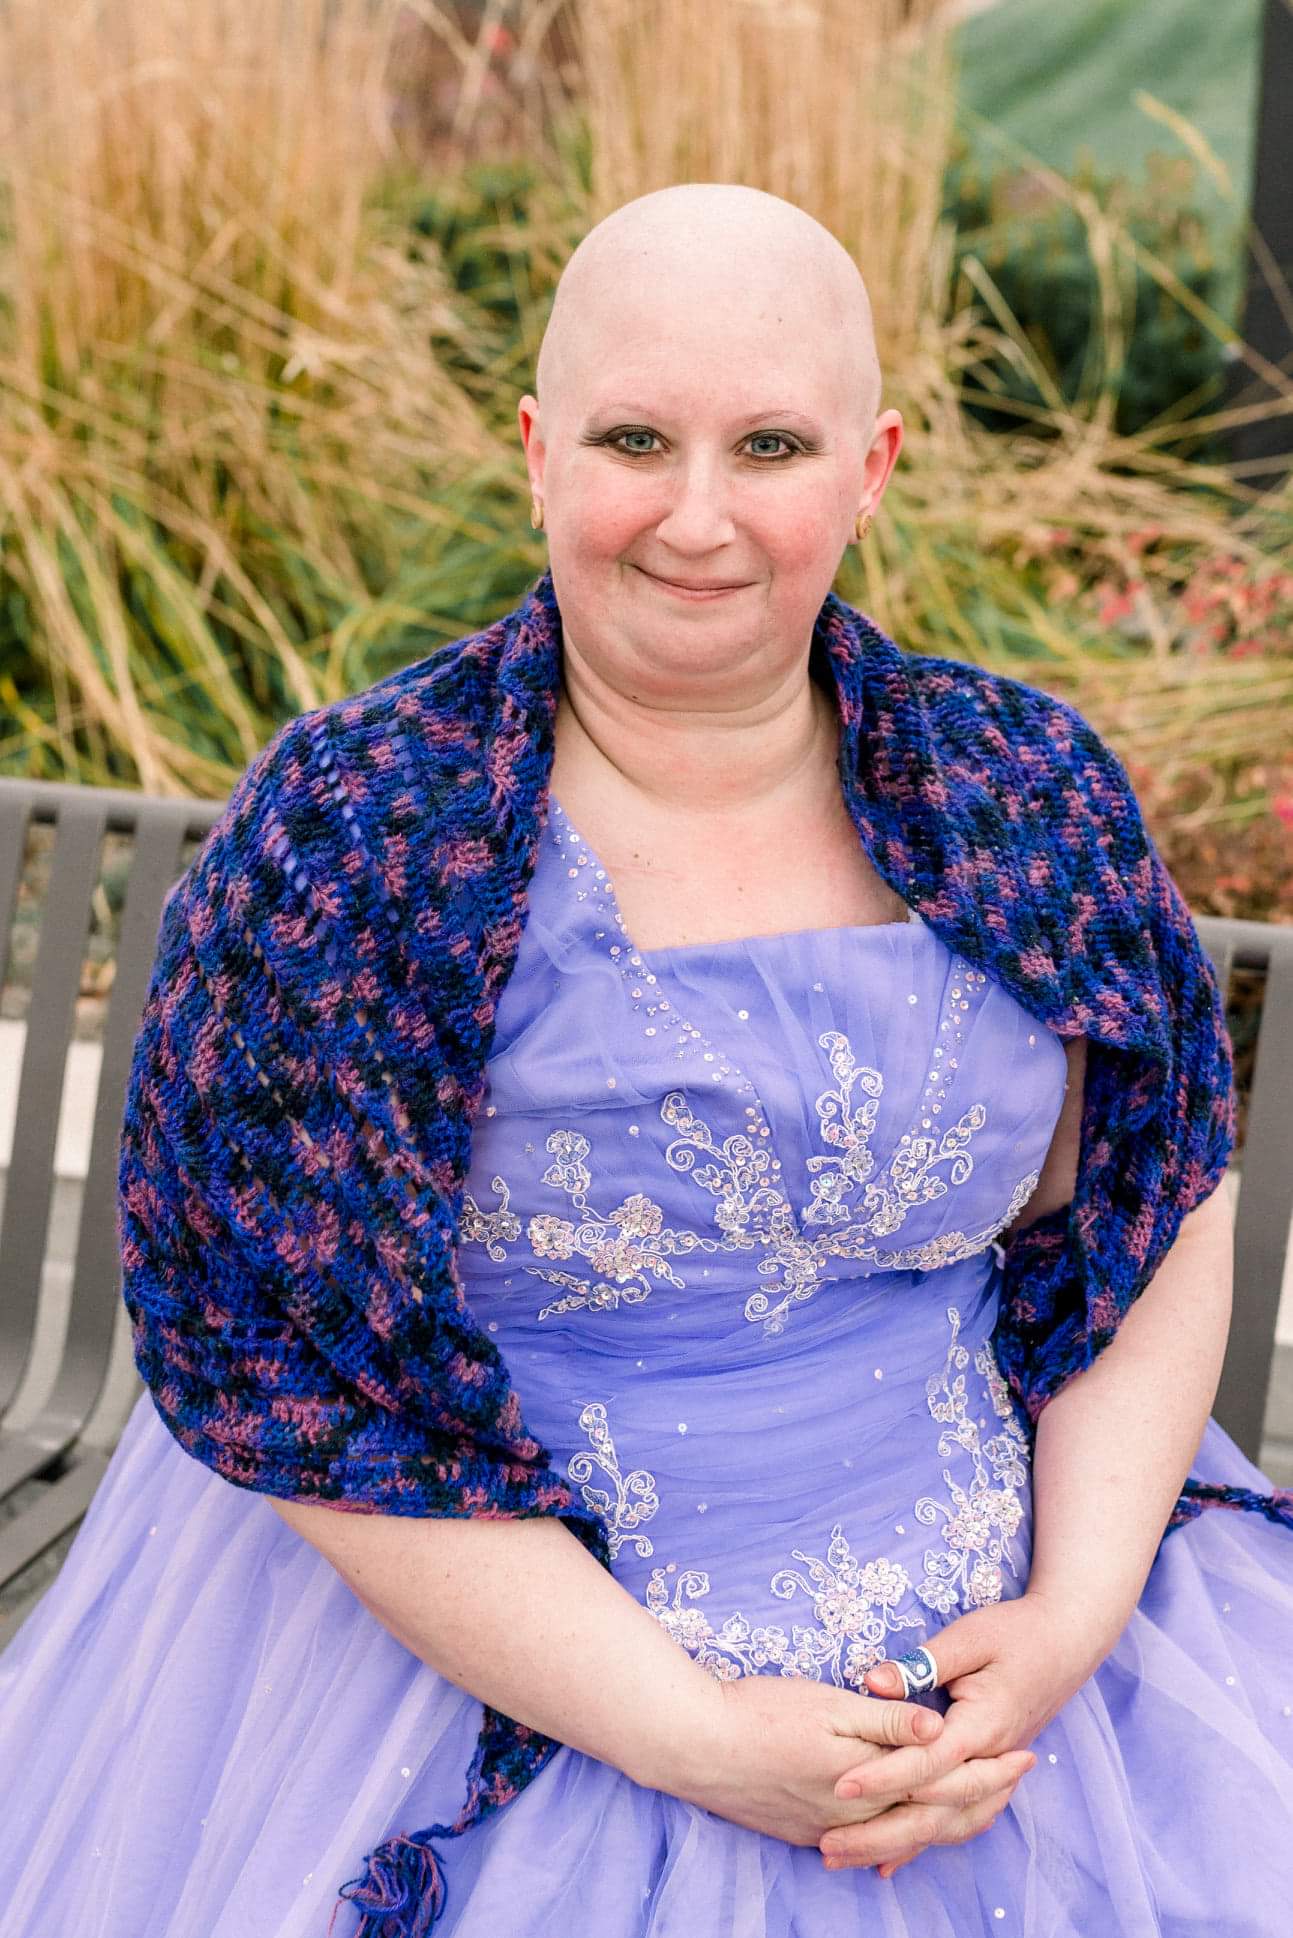 Cancer survivor picture sitting in a purple gown.